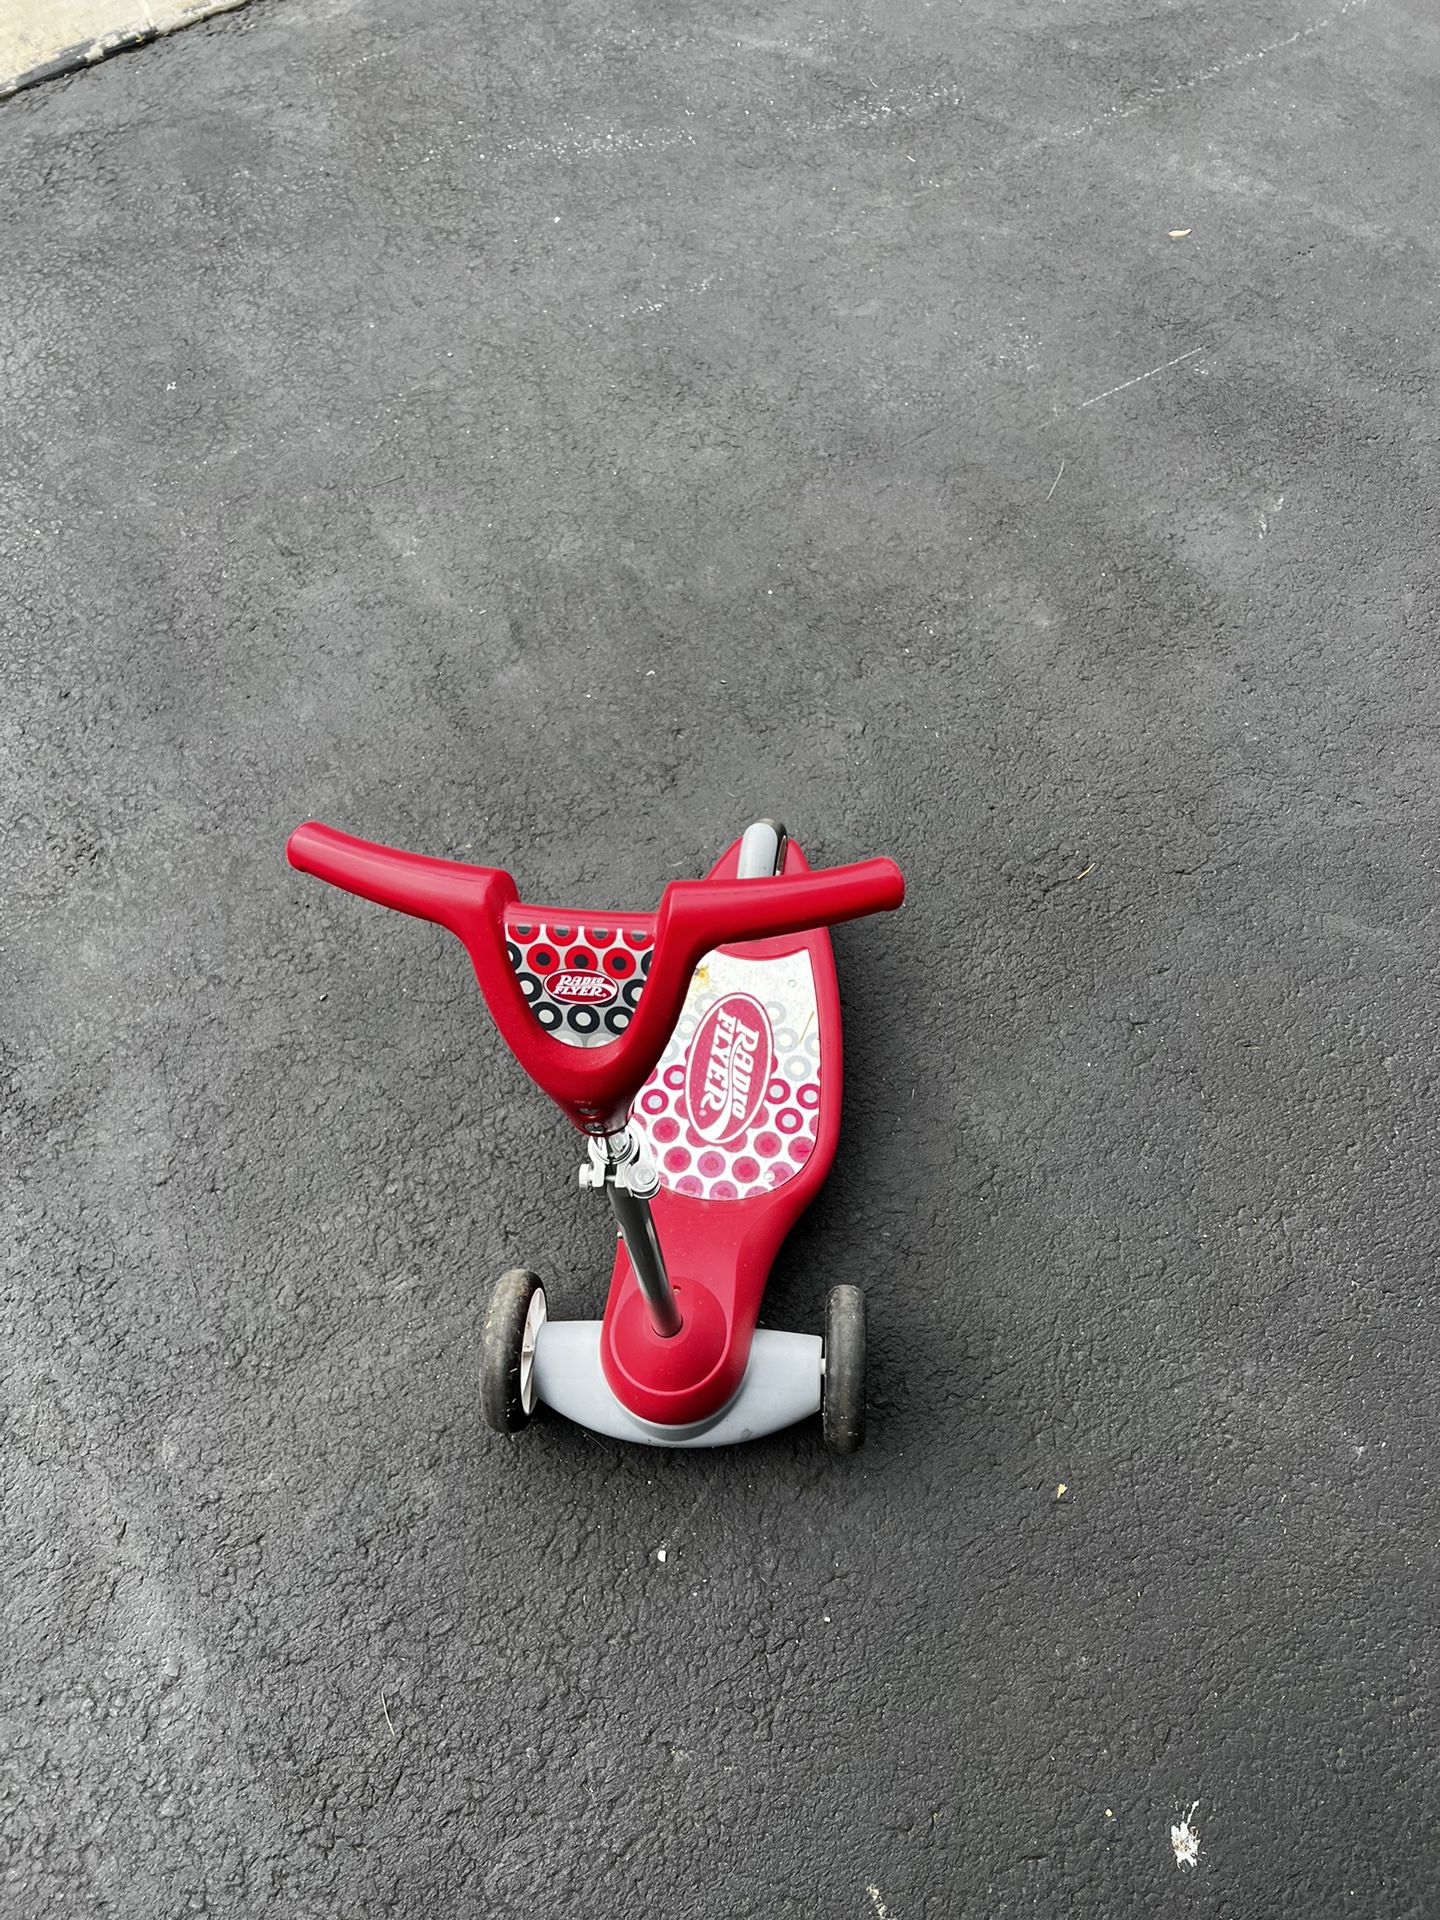 Radio Flyer Scooter For Kids 